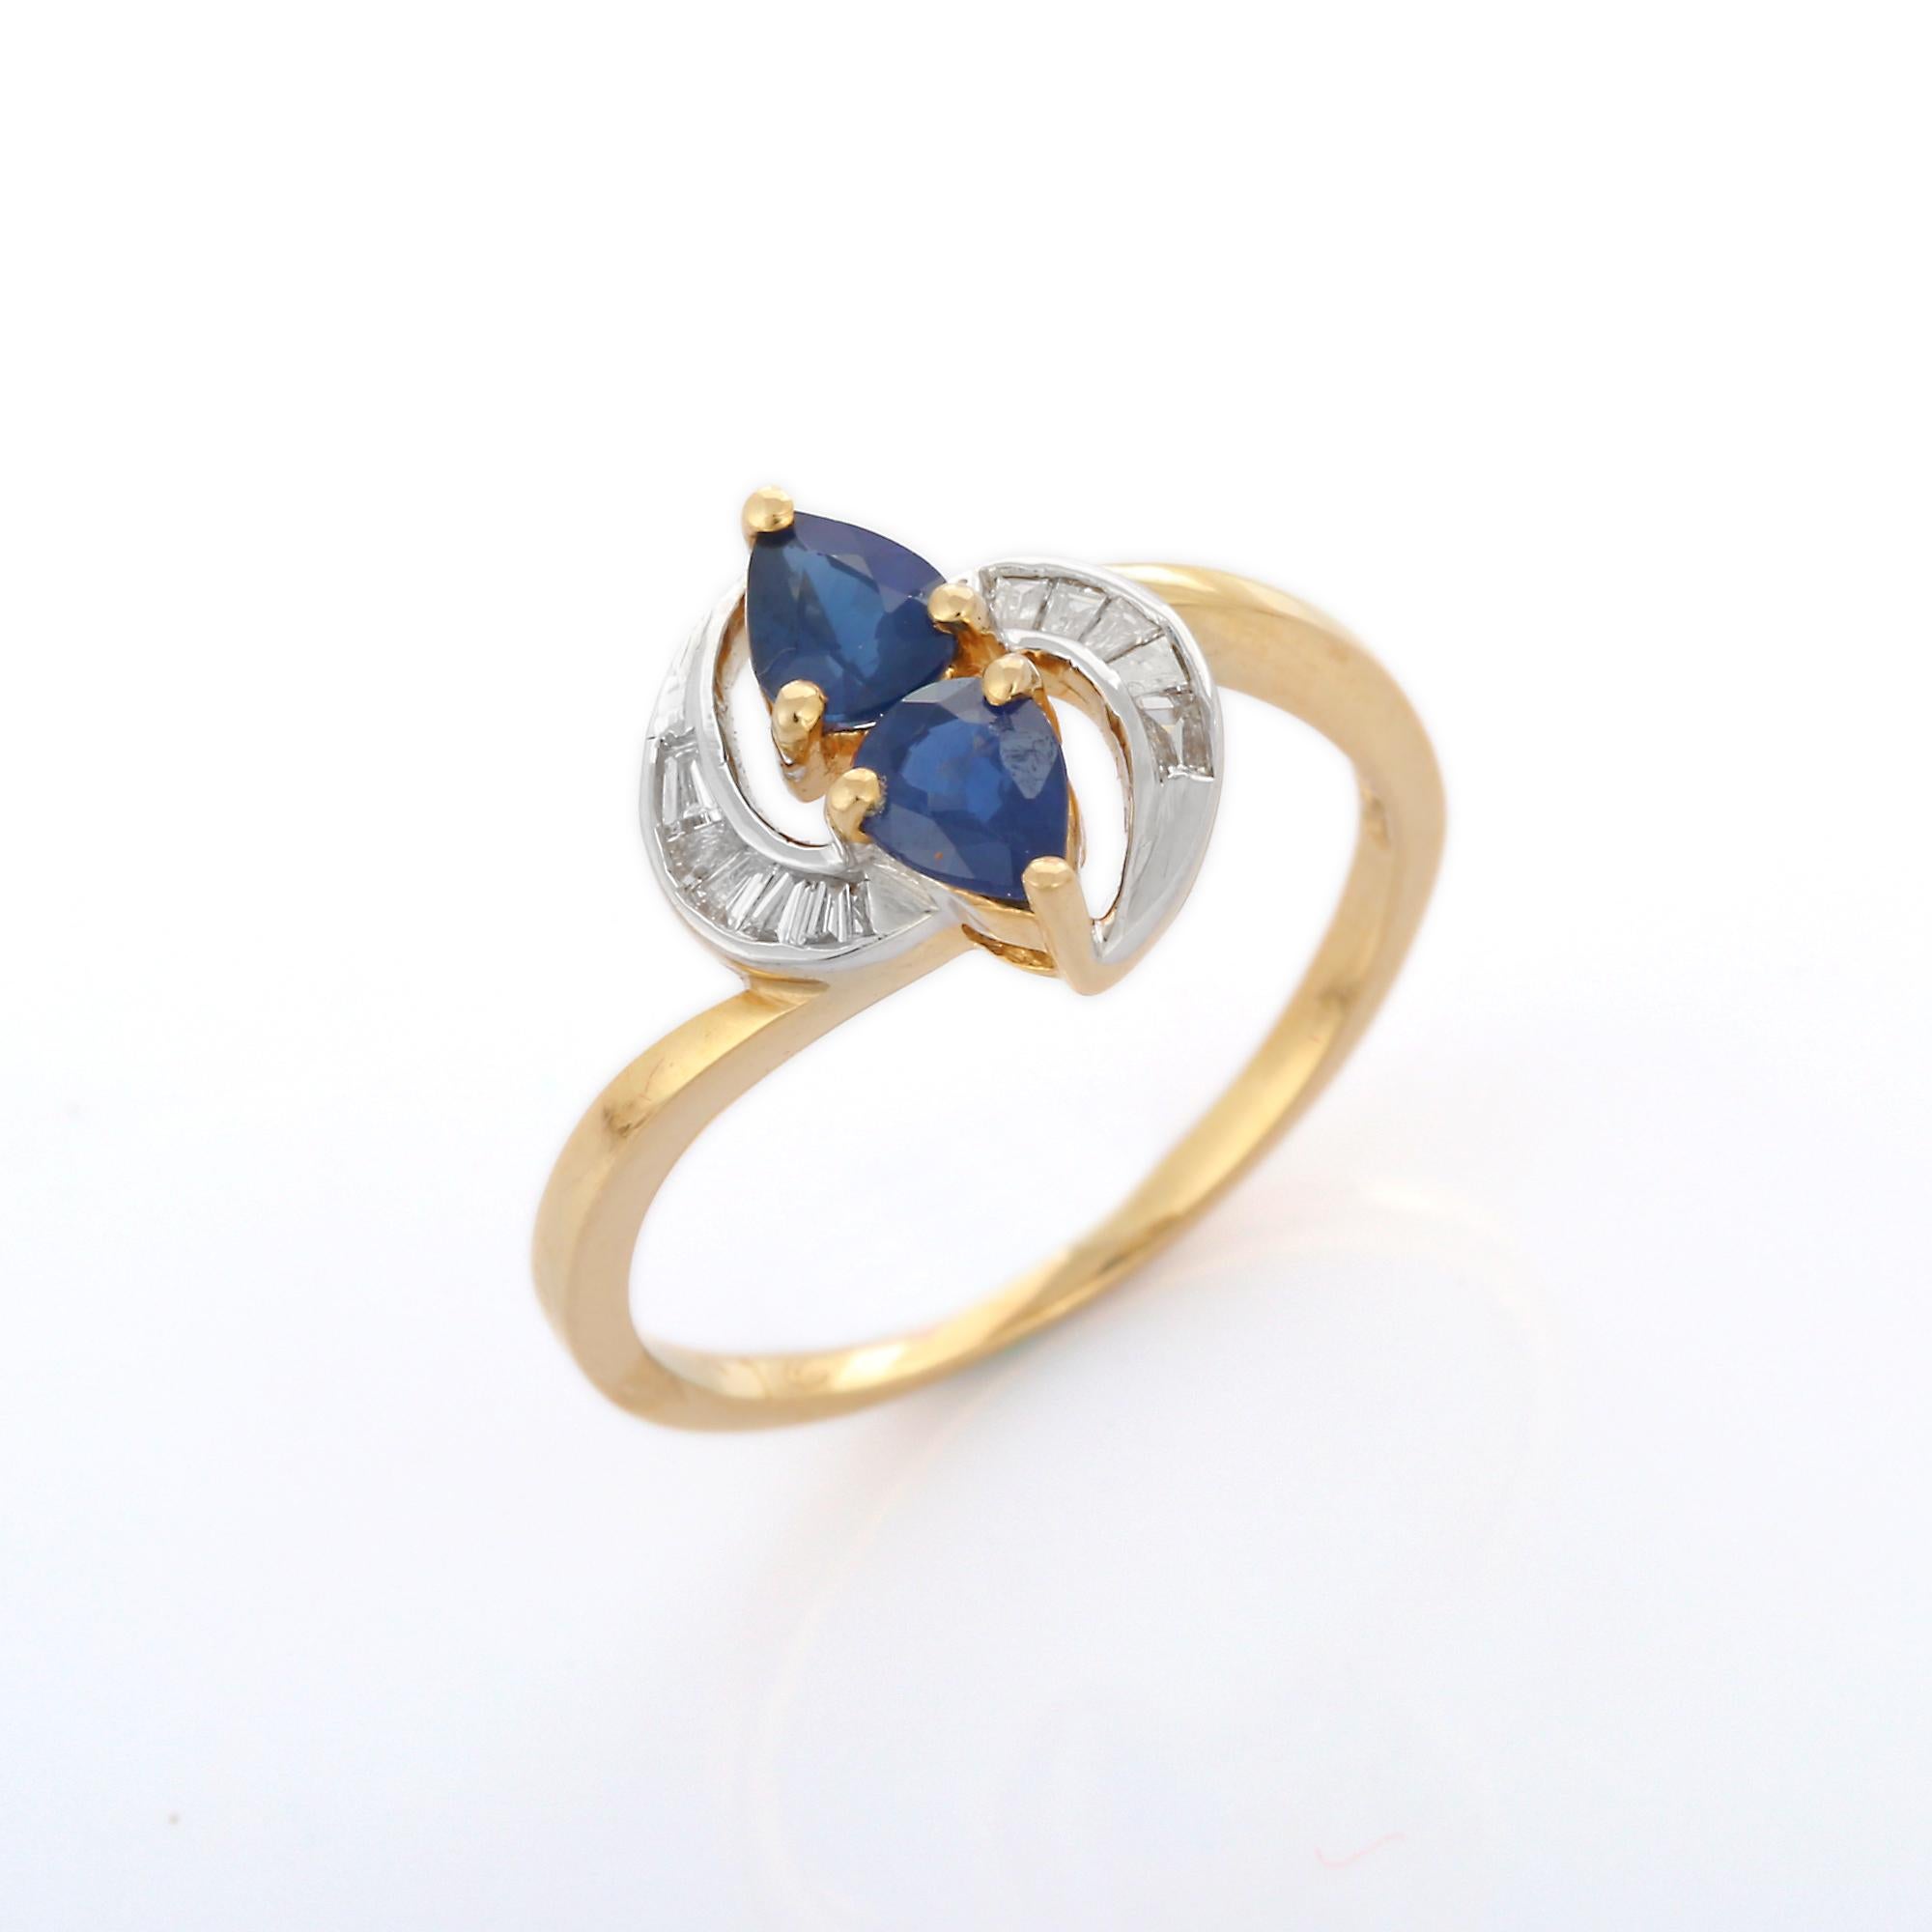 For Sale:  Natural Blue Sapphire Bridal Ring in 18K Yellow Gold with Diamonds 2